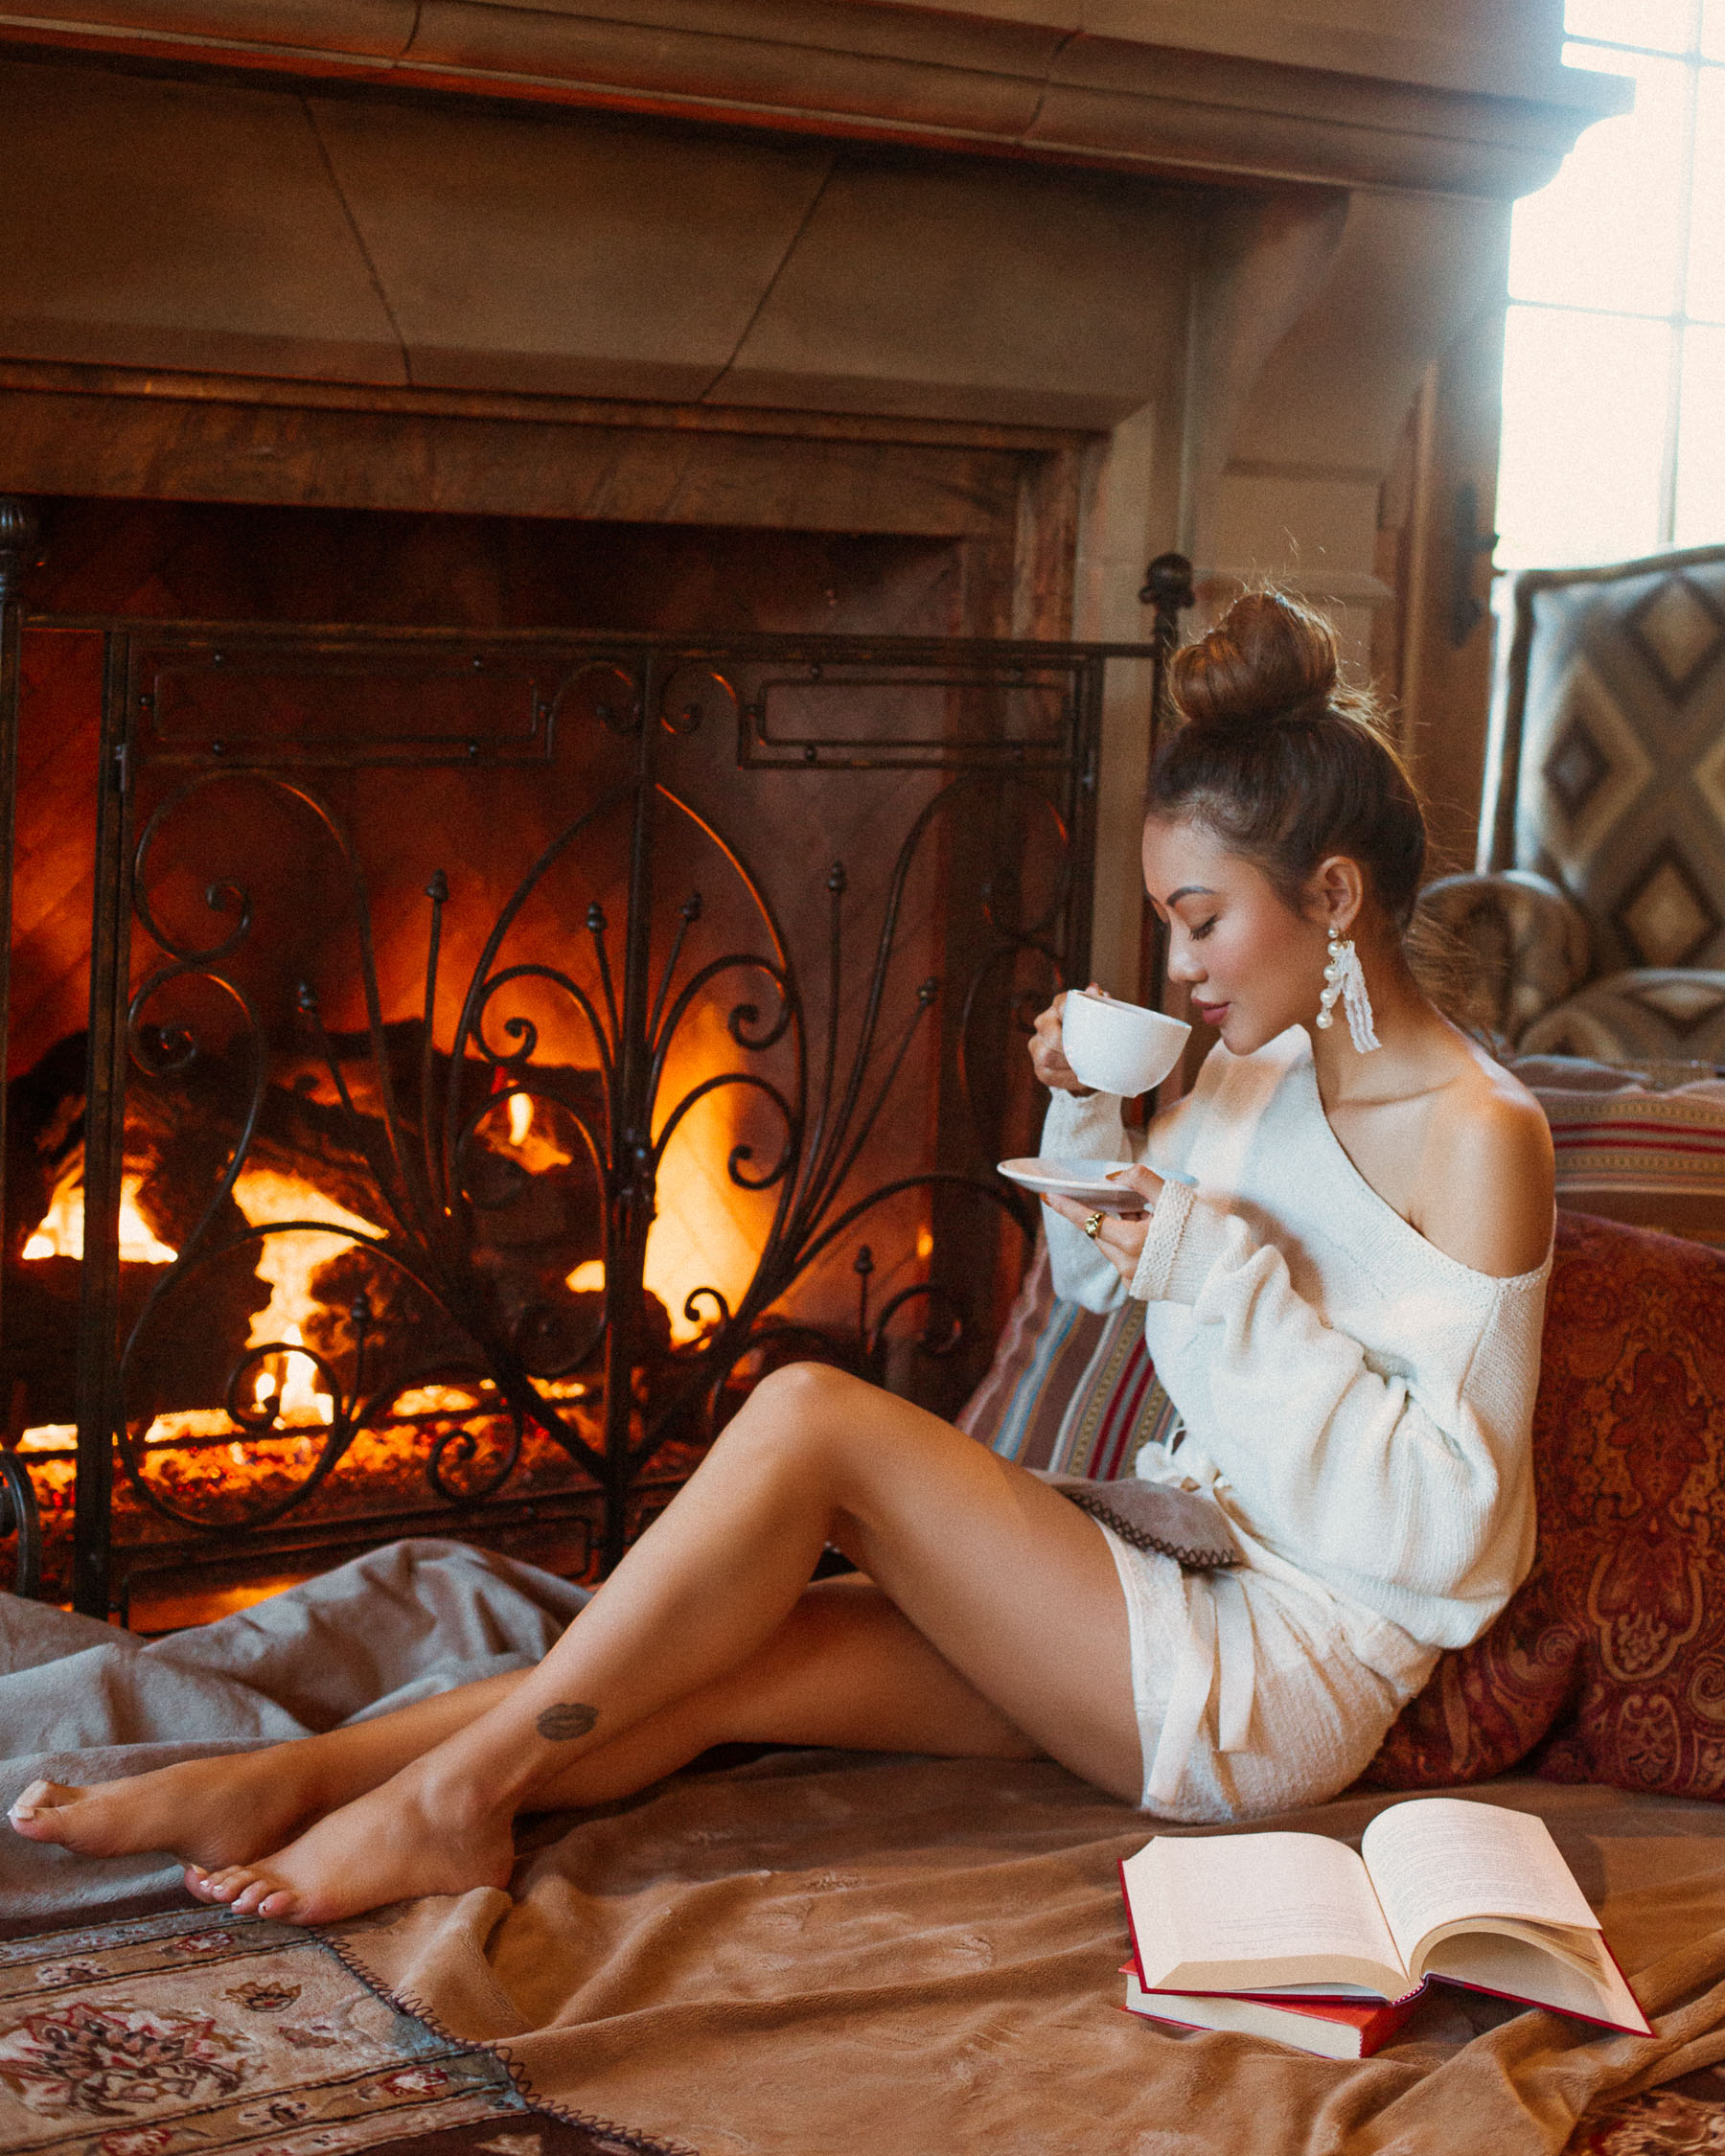 Make more time for yourself in the new year // Cozy white sweater by the fireplace // Notjessfashion.com